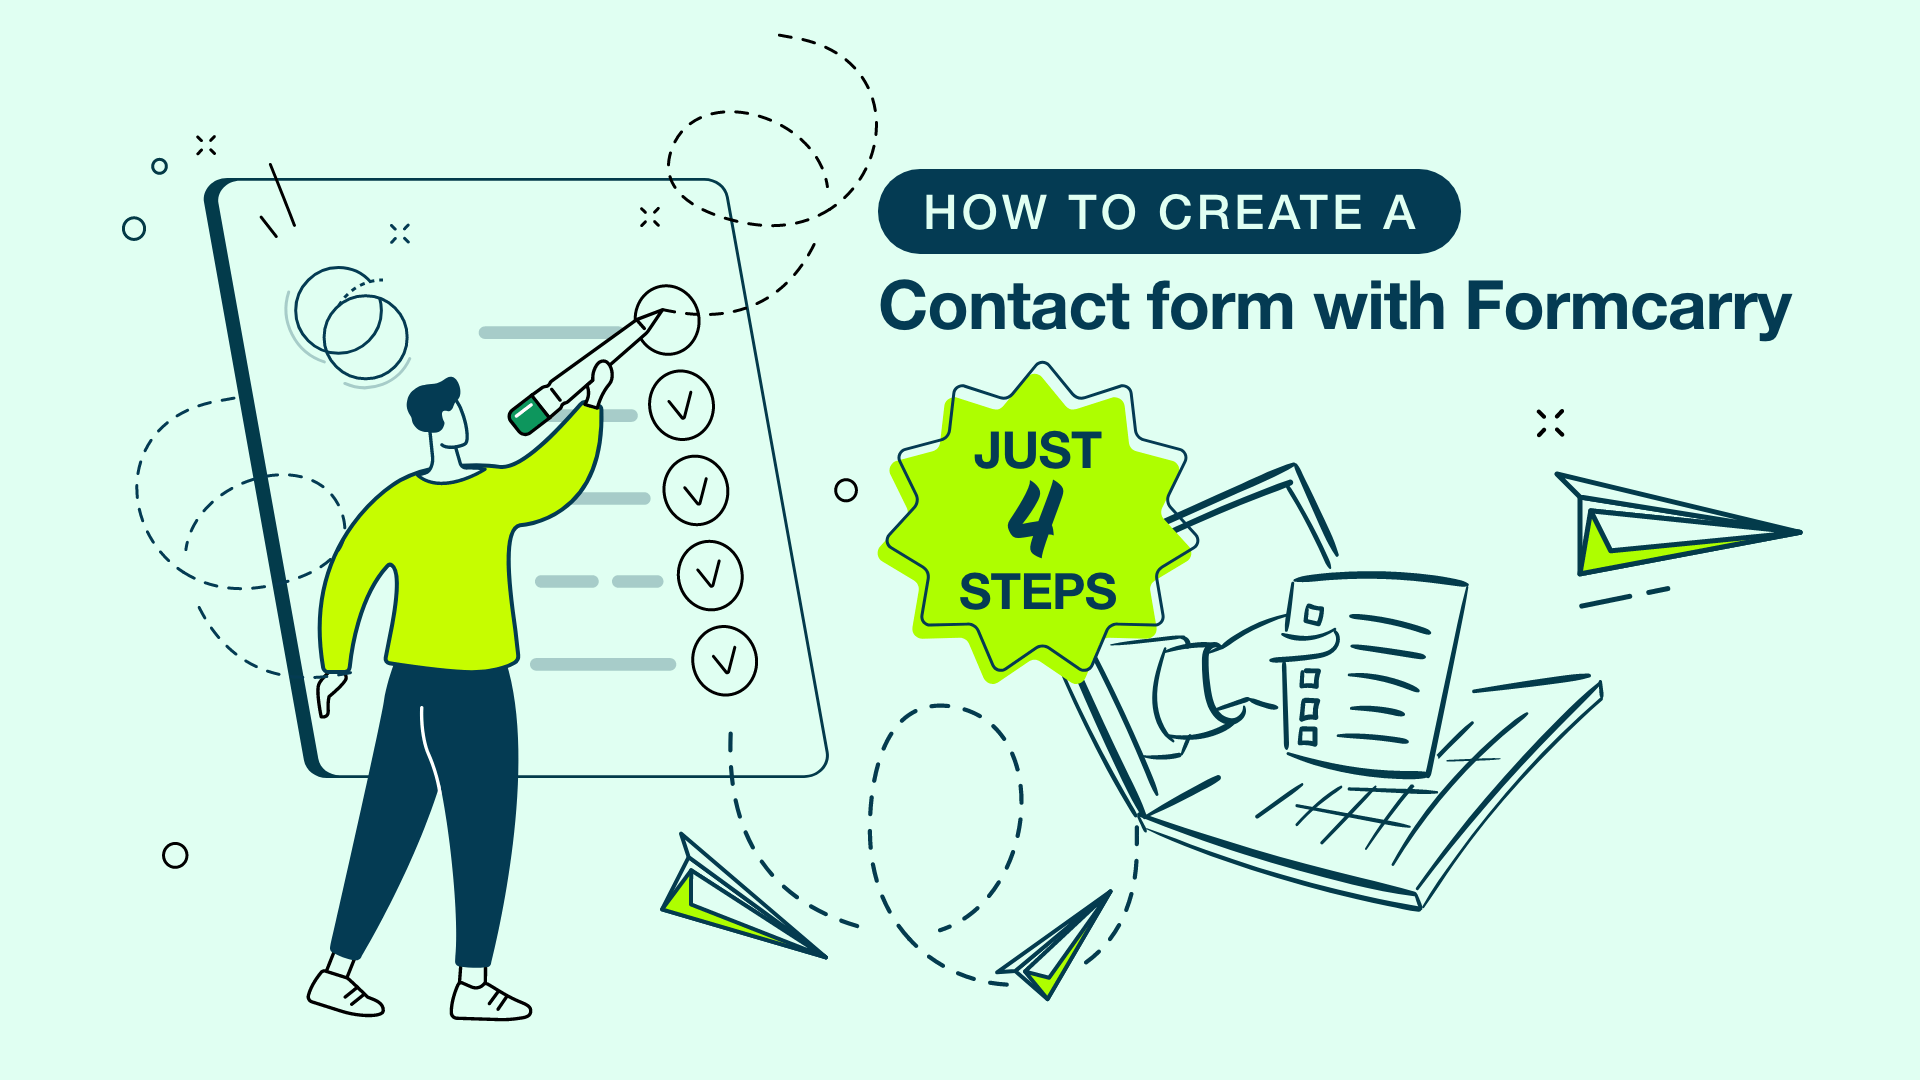 How to create a contact form with formcarry in 4 steps